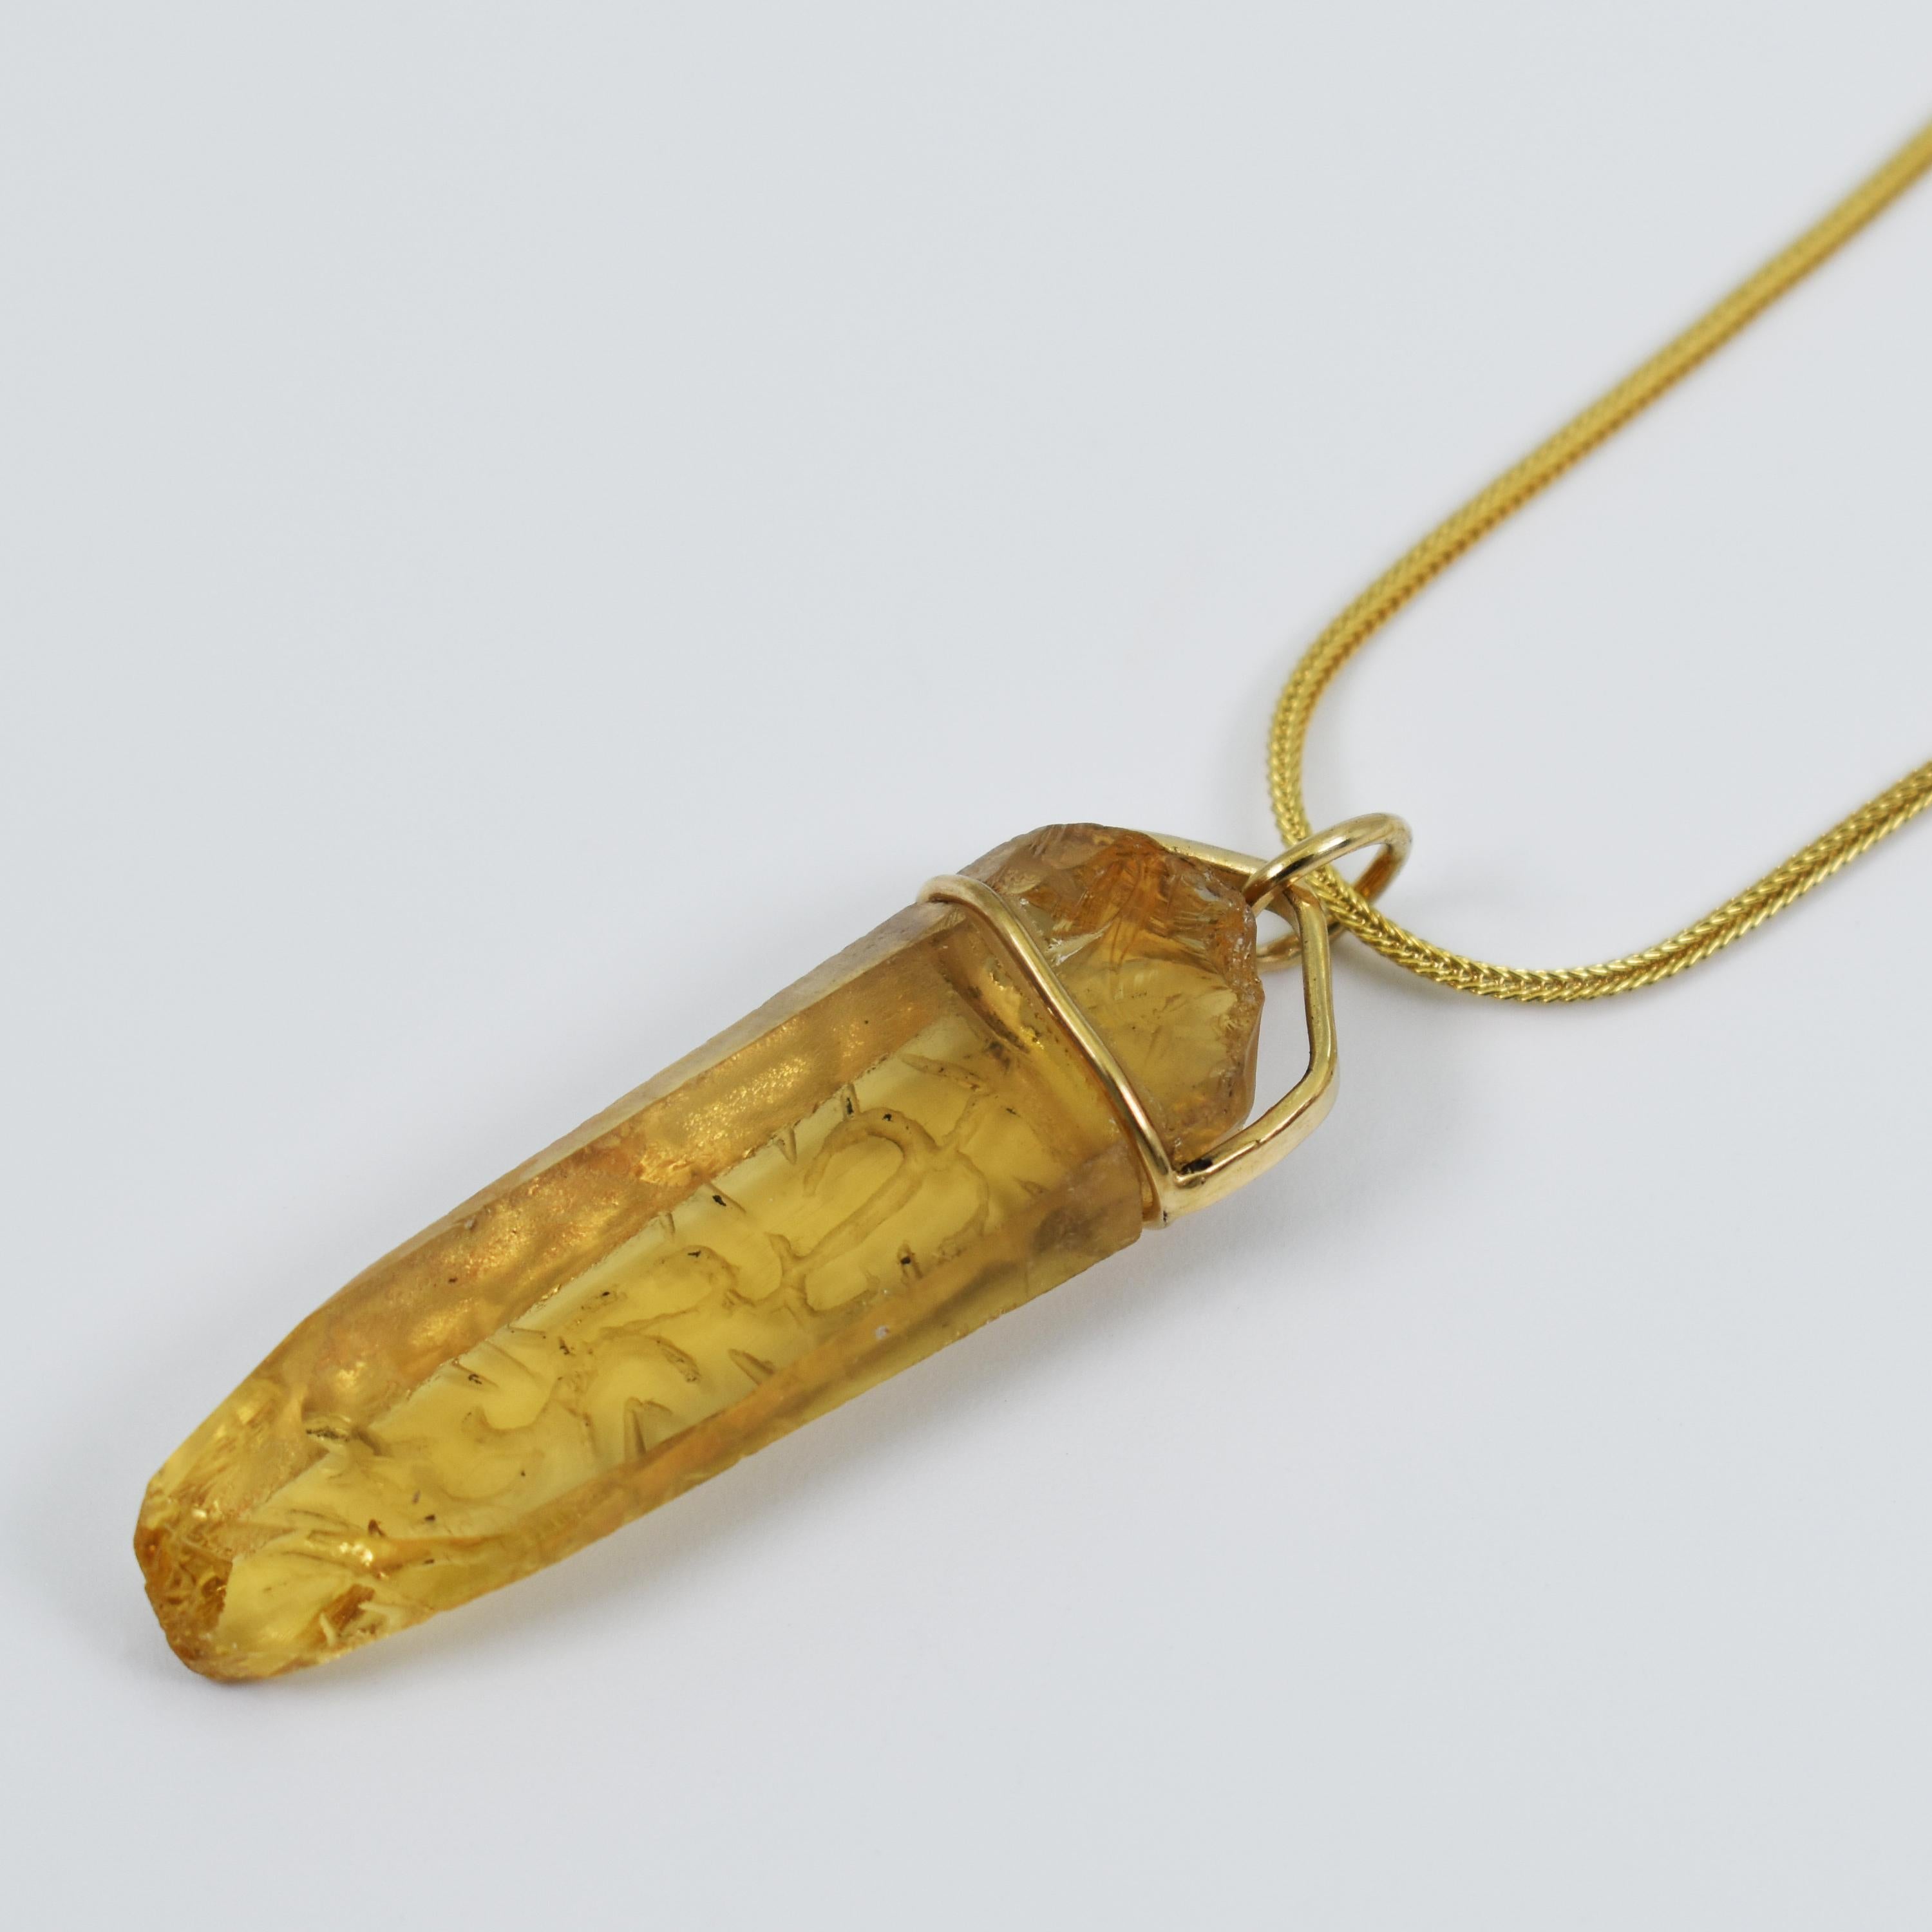 imperial topaz necklace